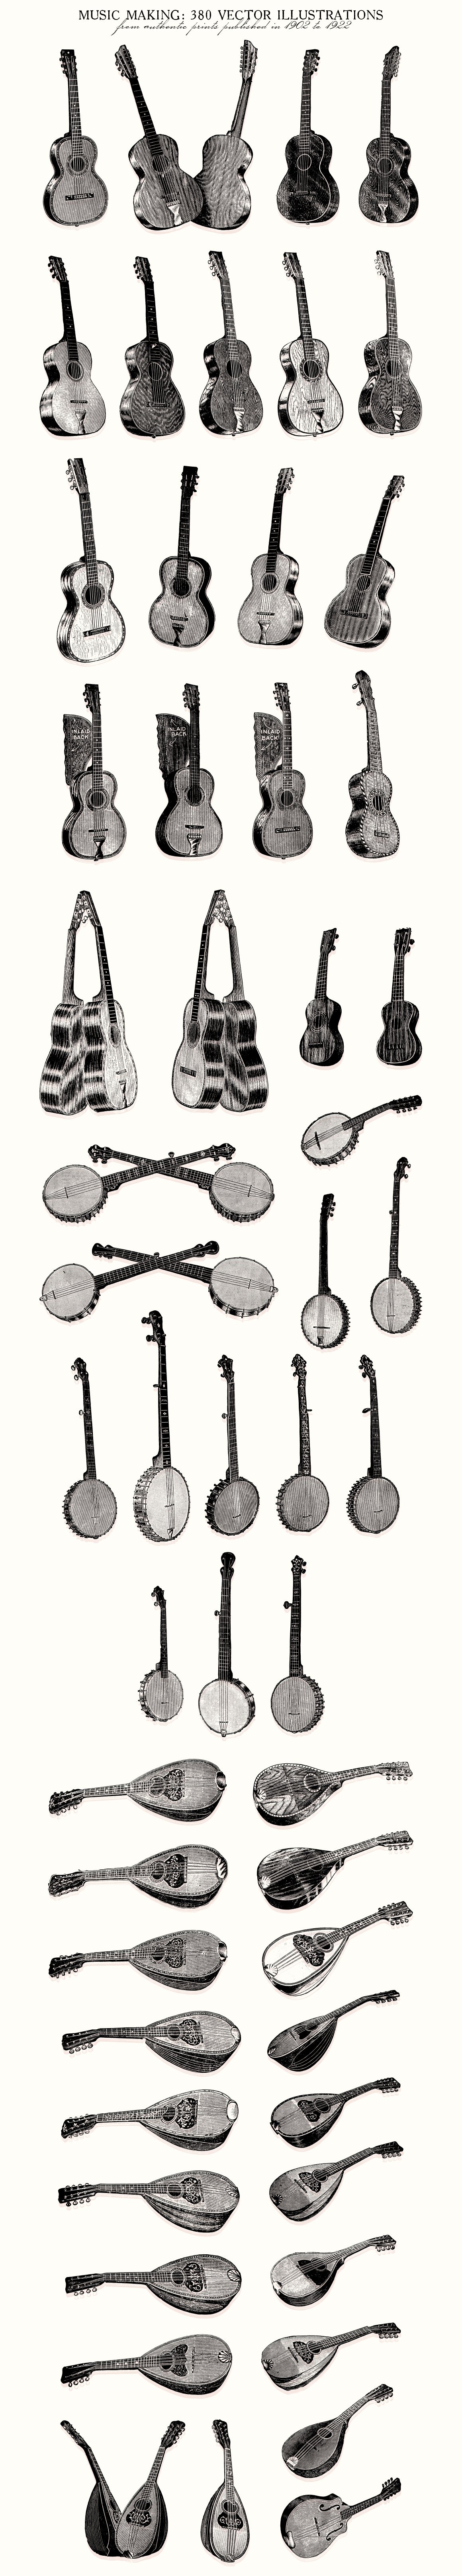 A selection of gorgeous images of vintage musical instruments.